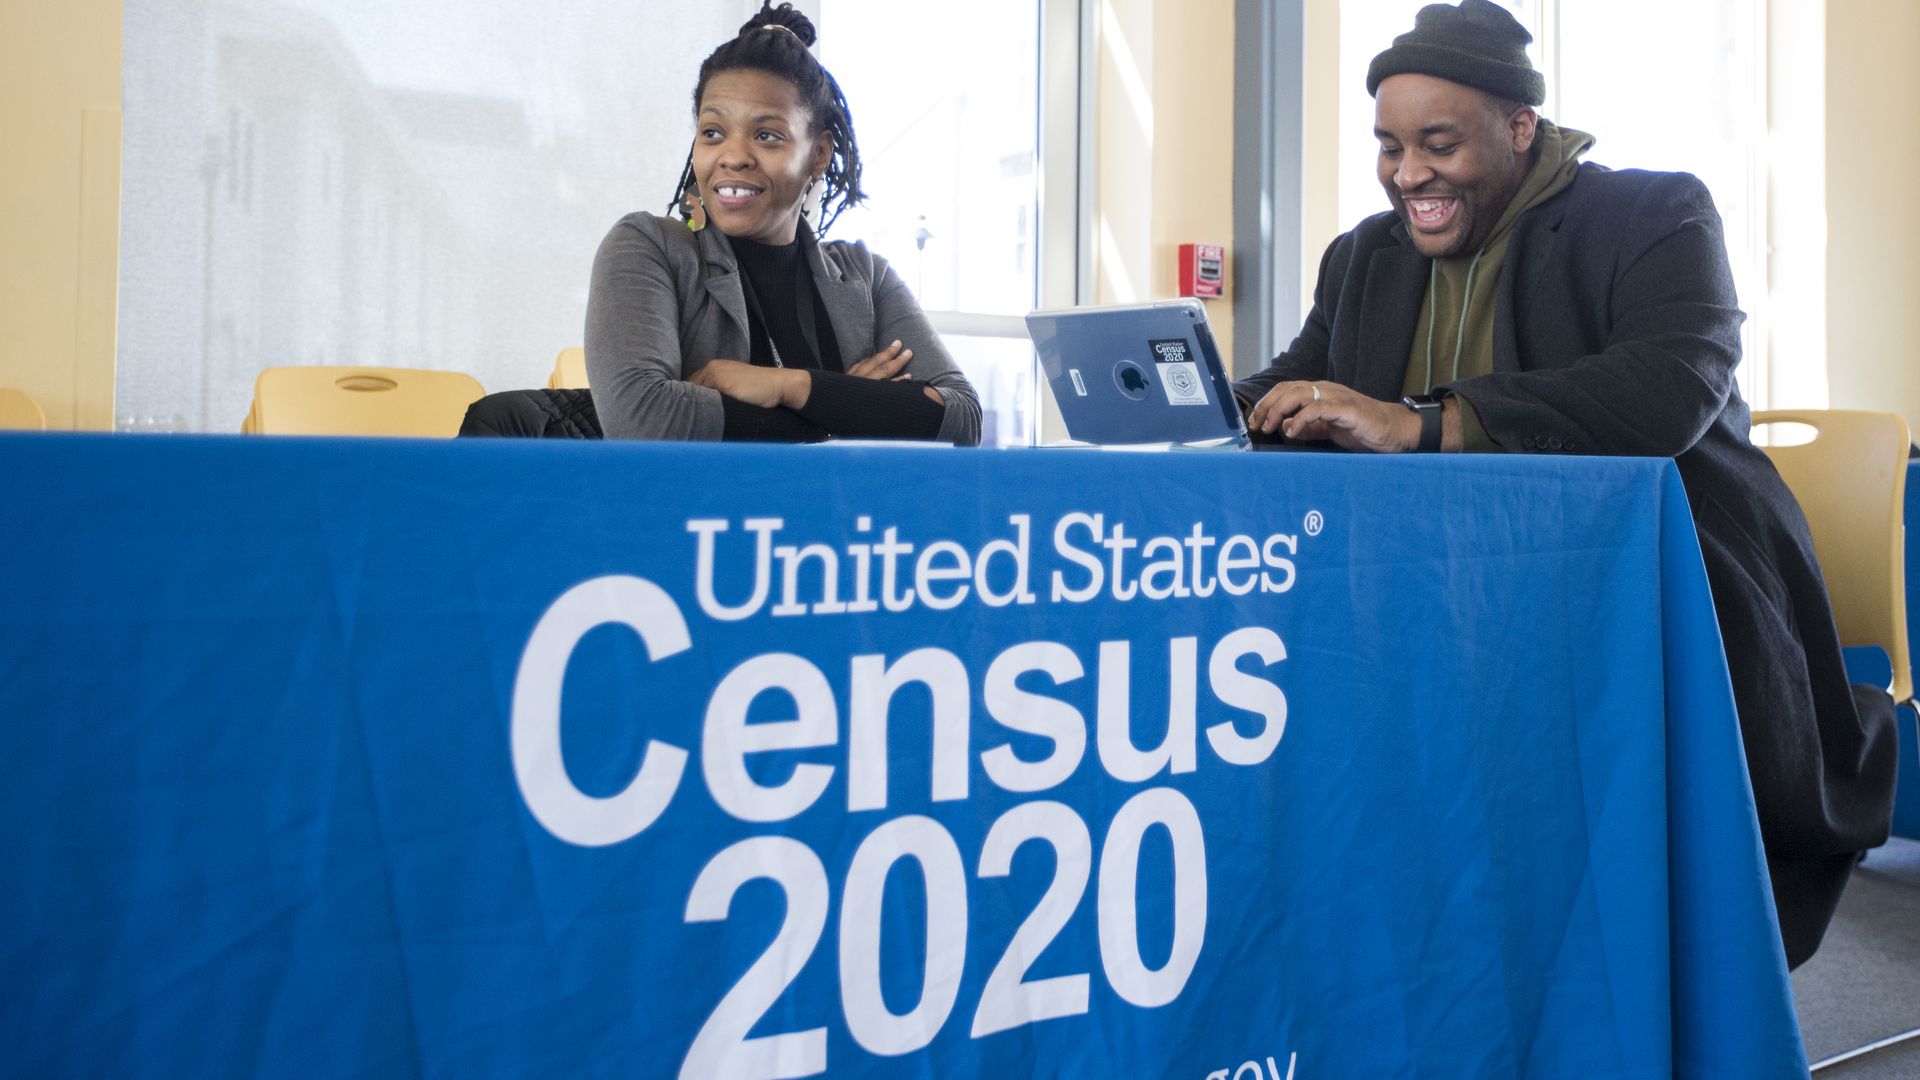 In this image, a man and a woman sit at a table that reads "Census 2020" 